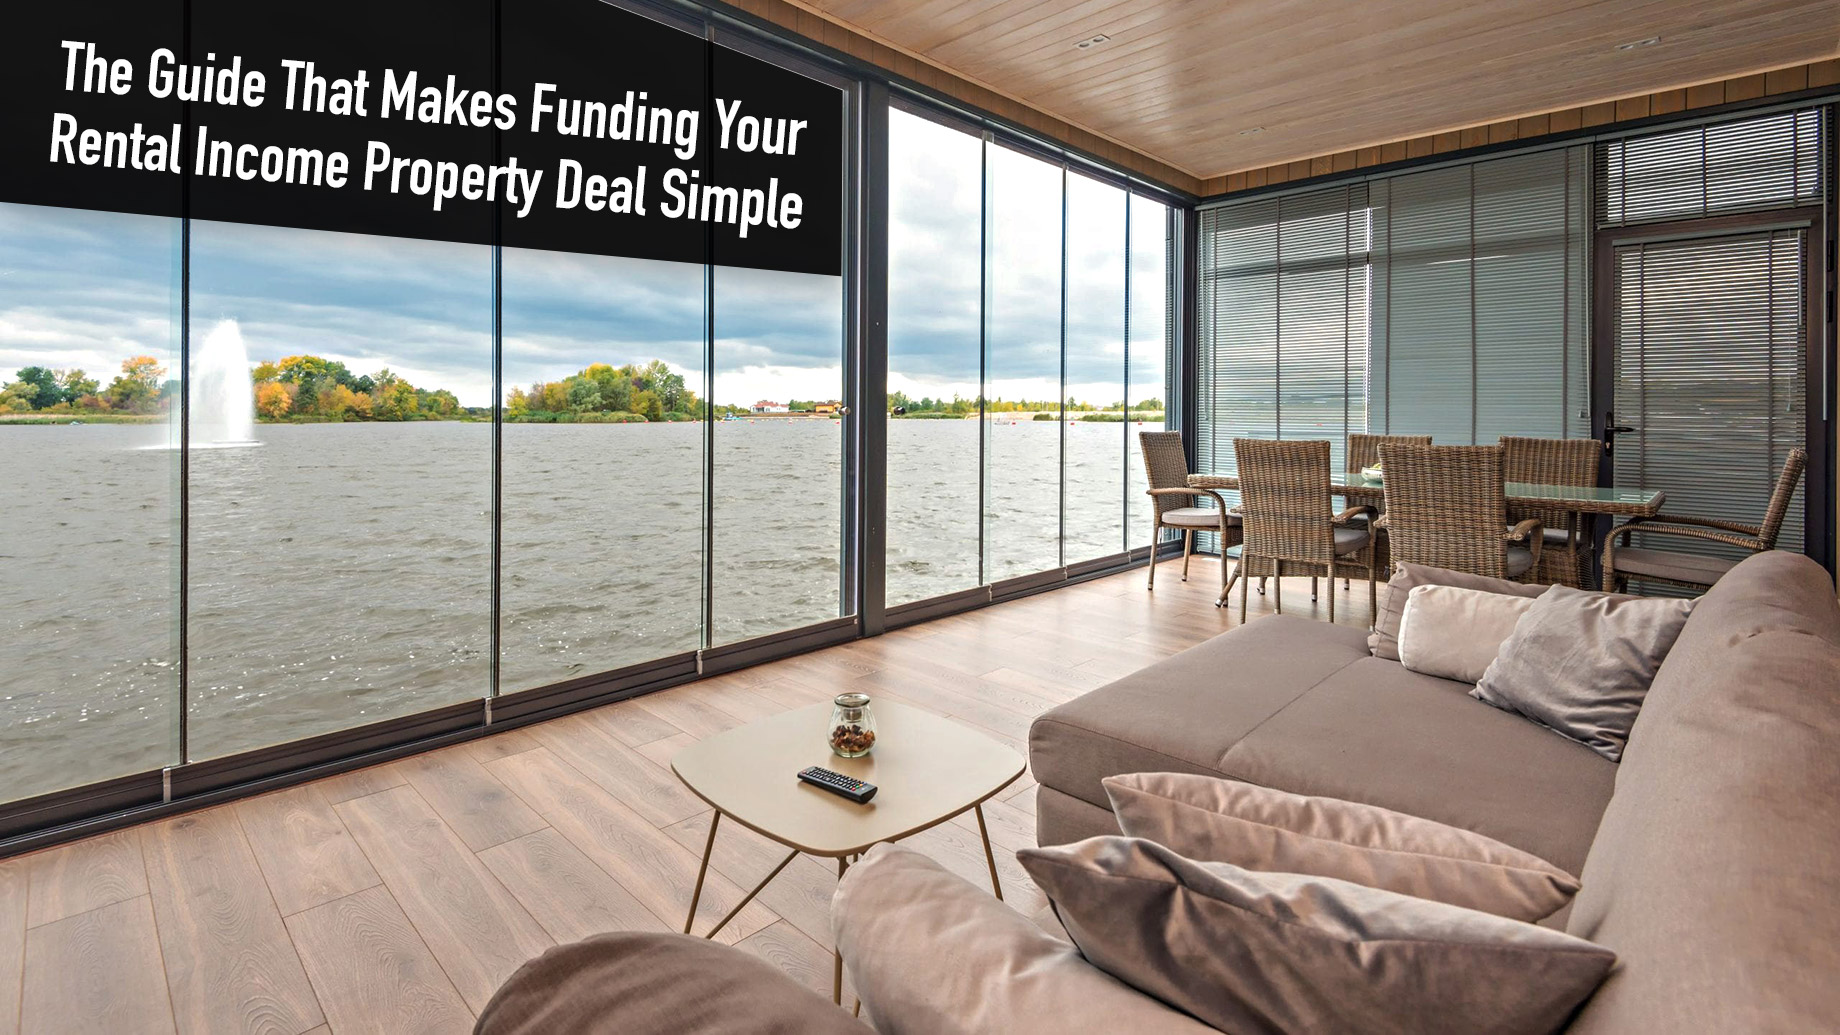 The Guide That Makes Funding Your Rental Income Property Deal Simple